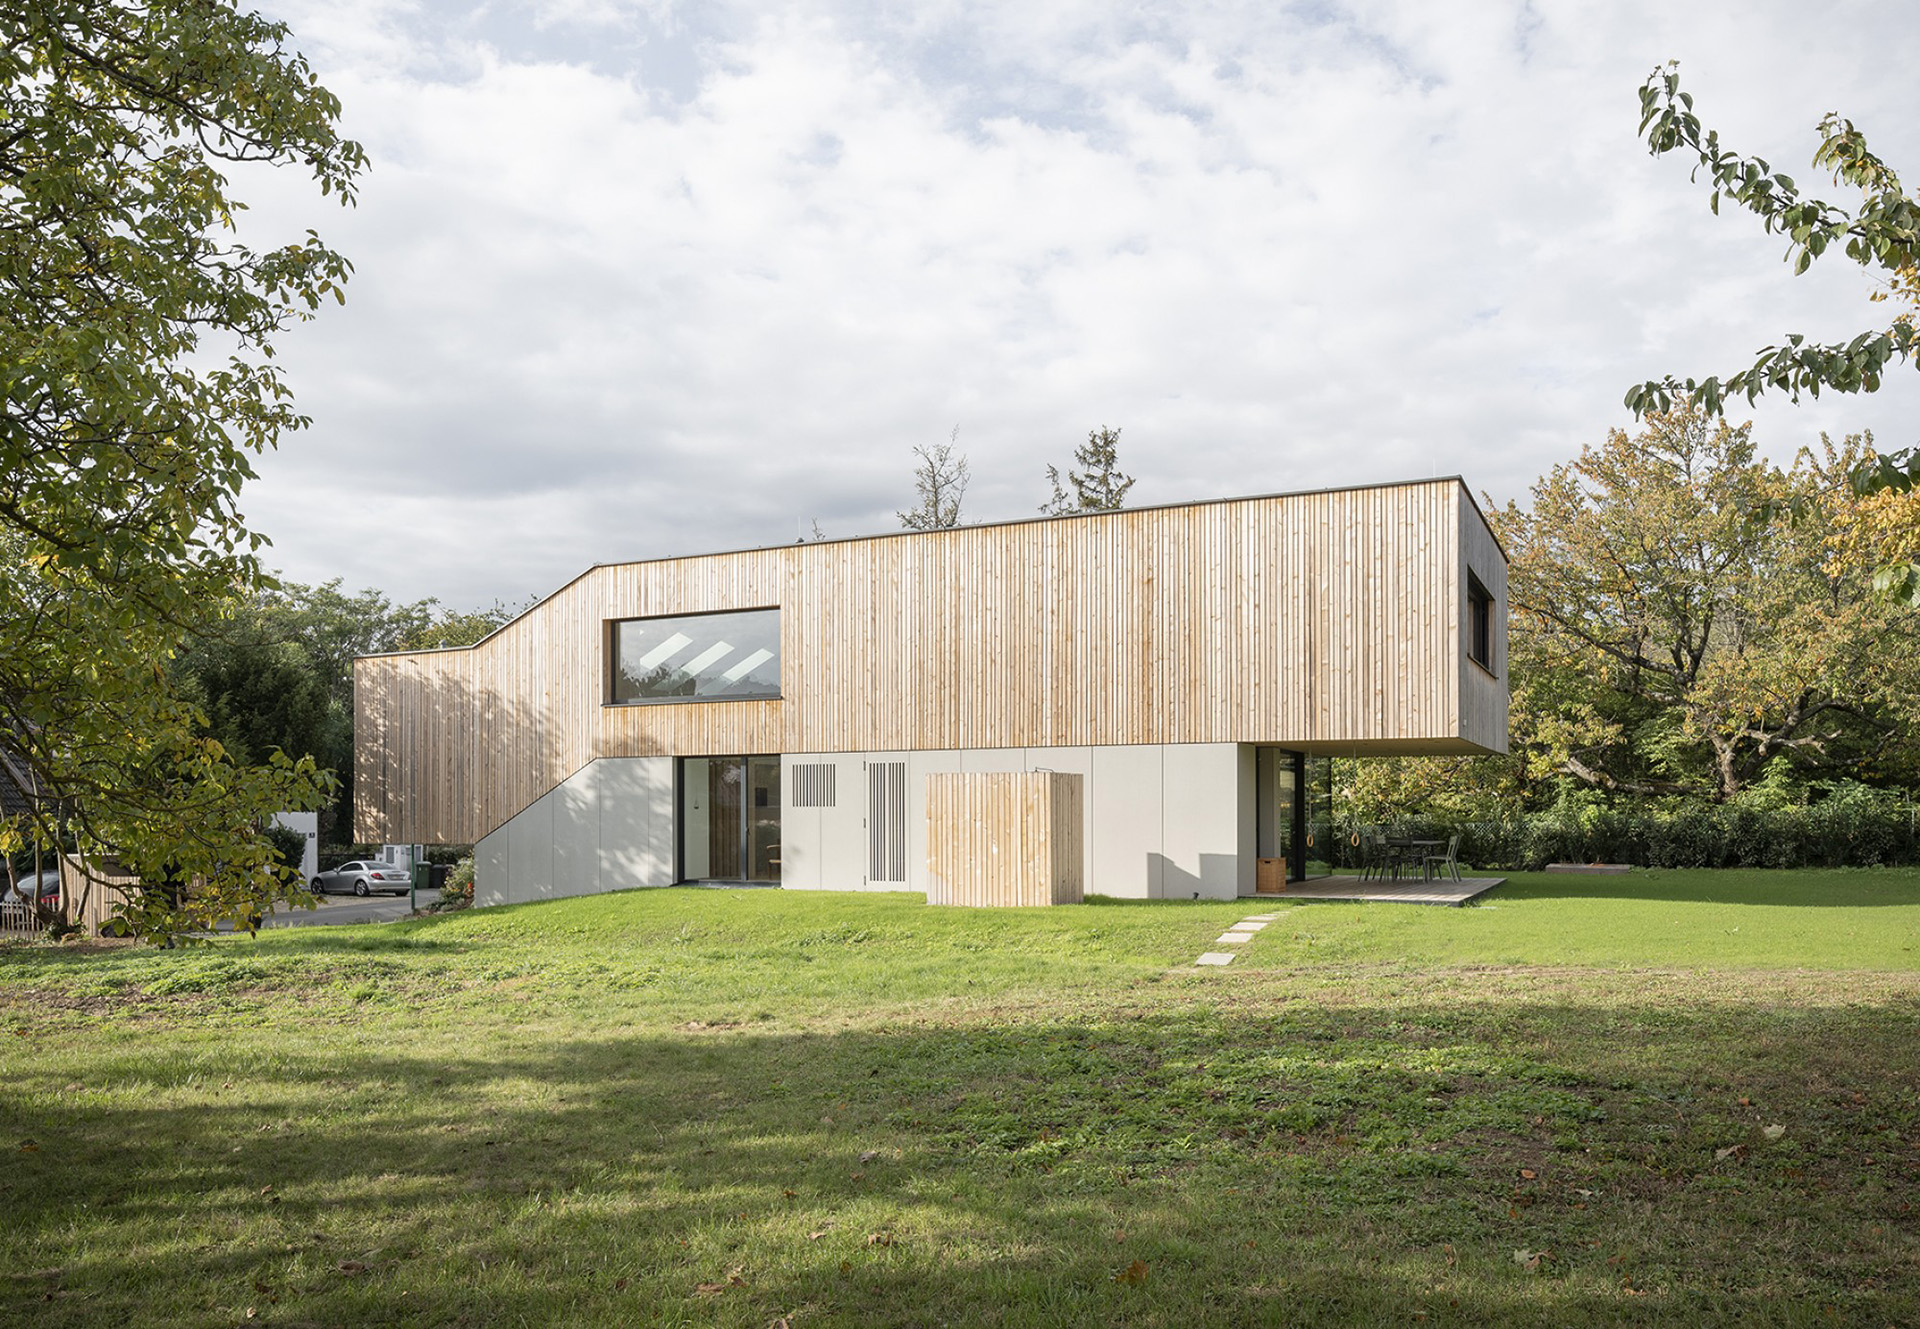 S-House made of wood and concrete for a contemporary and sustainable living space